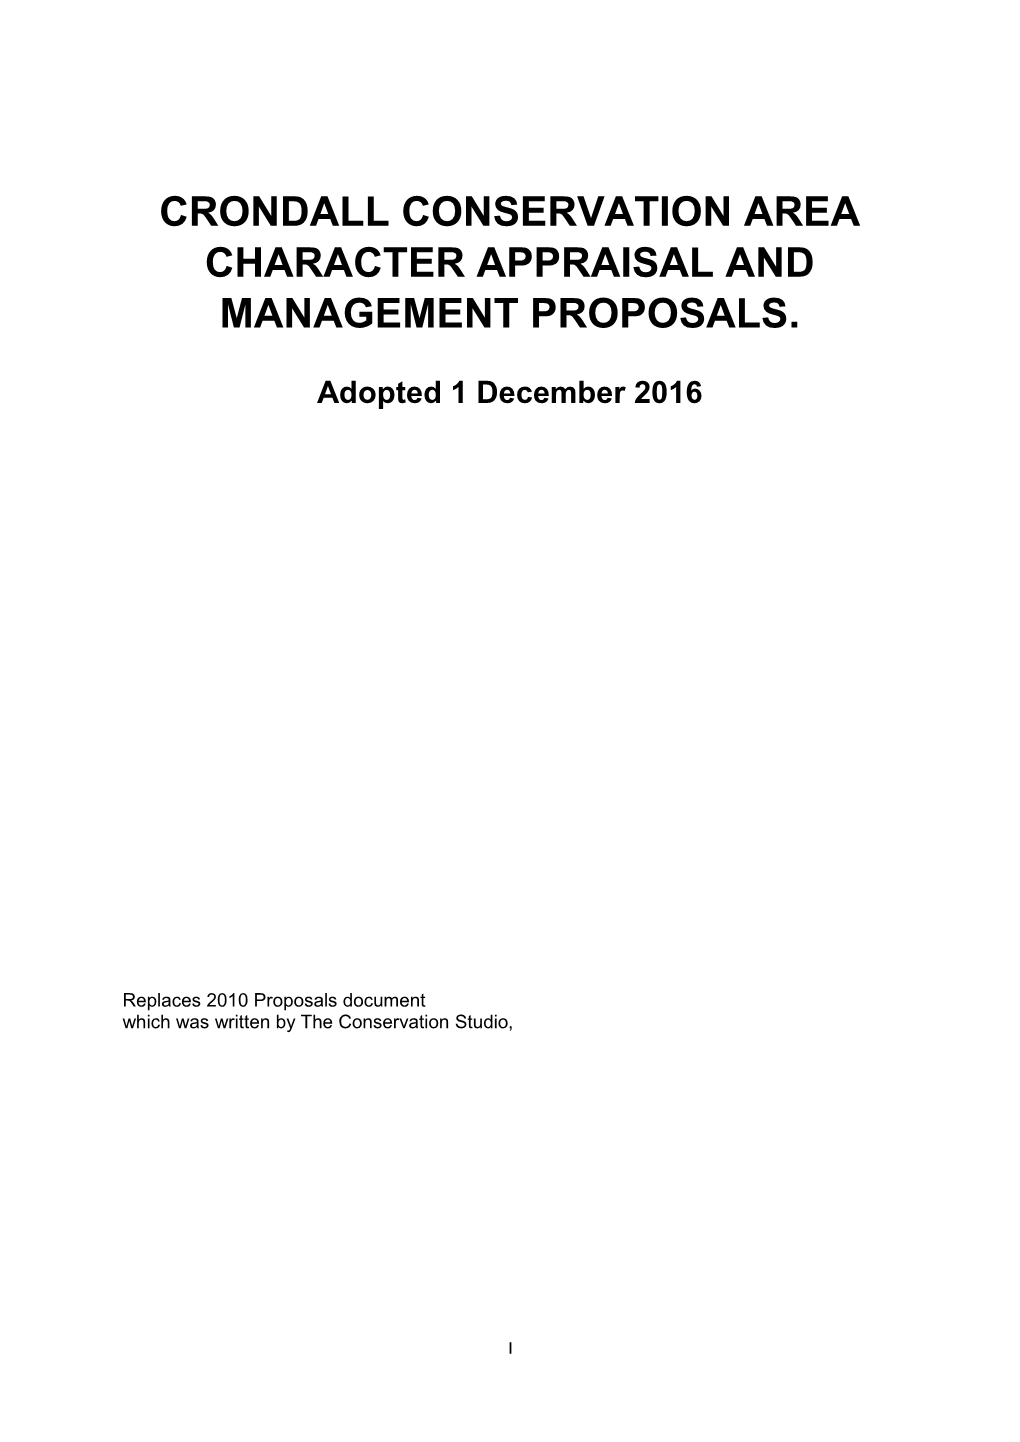 Crondall Conservation Area Character Appraisal and Management Proposals